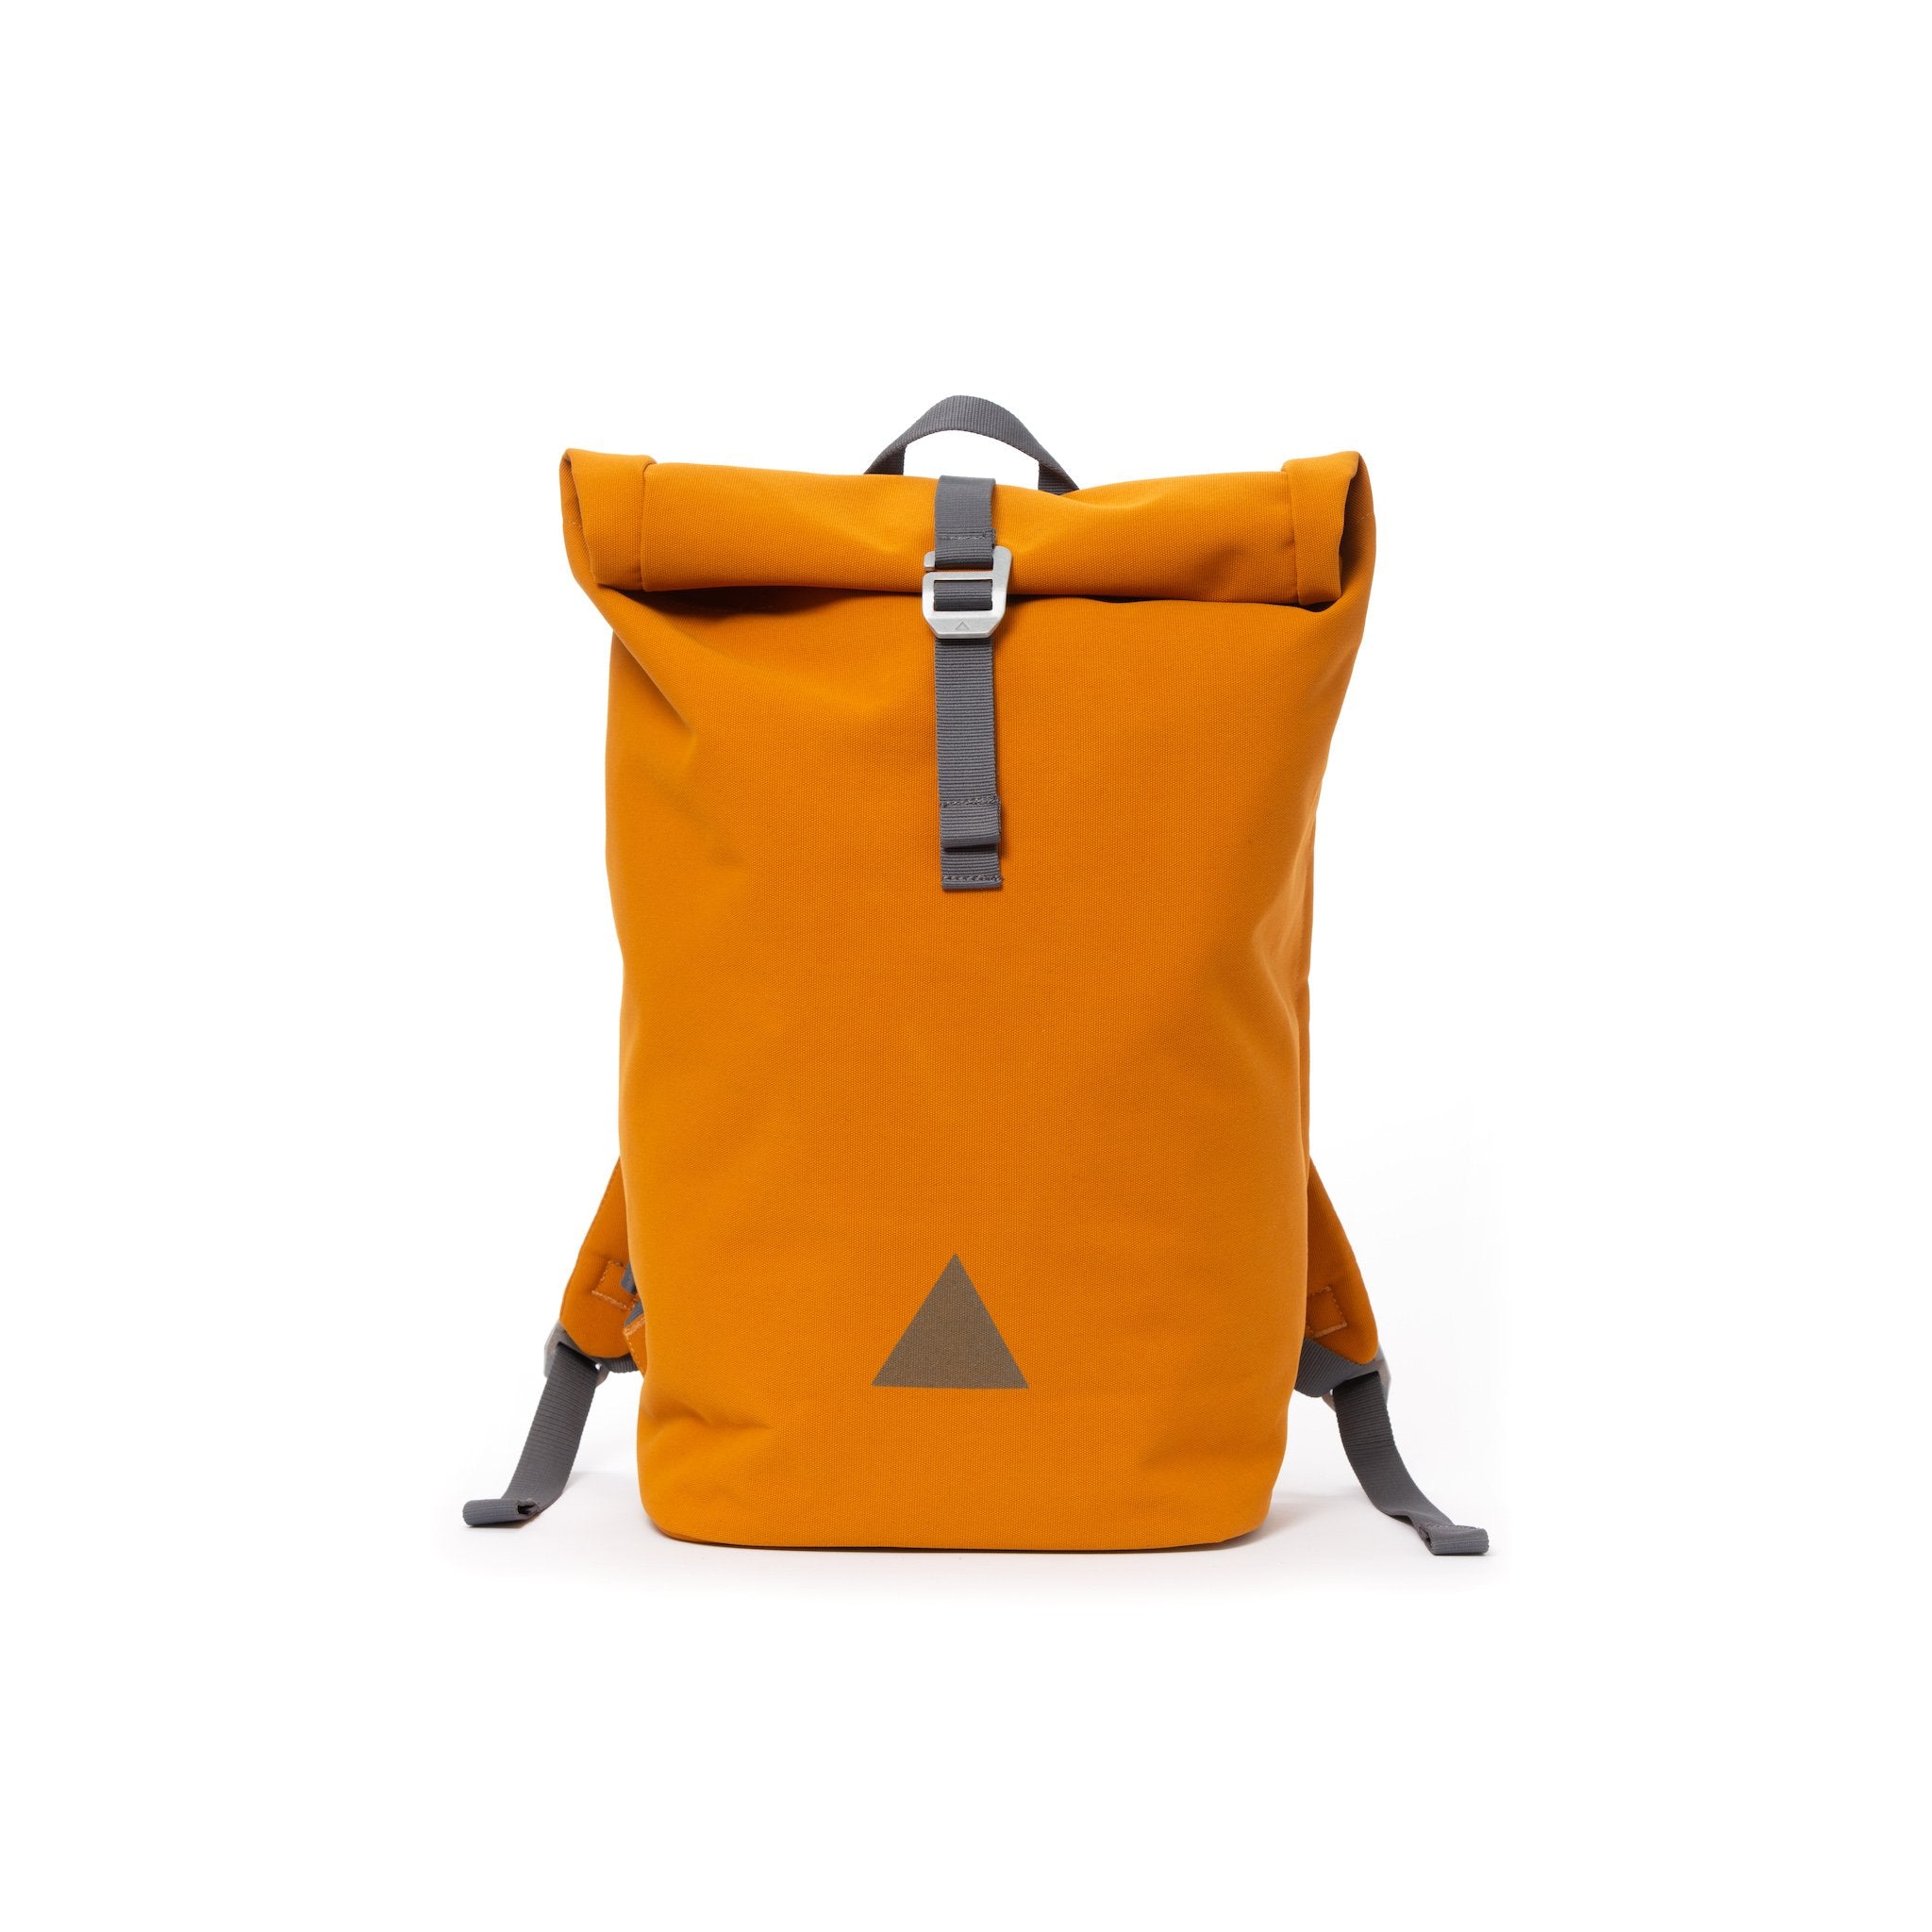 Orange recycled canvas men’s rolltop backpack with triangle logo.